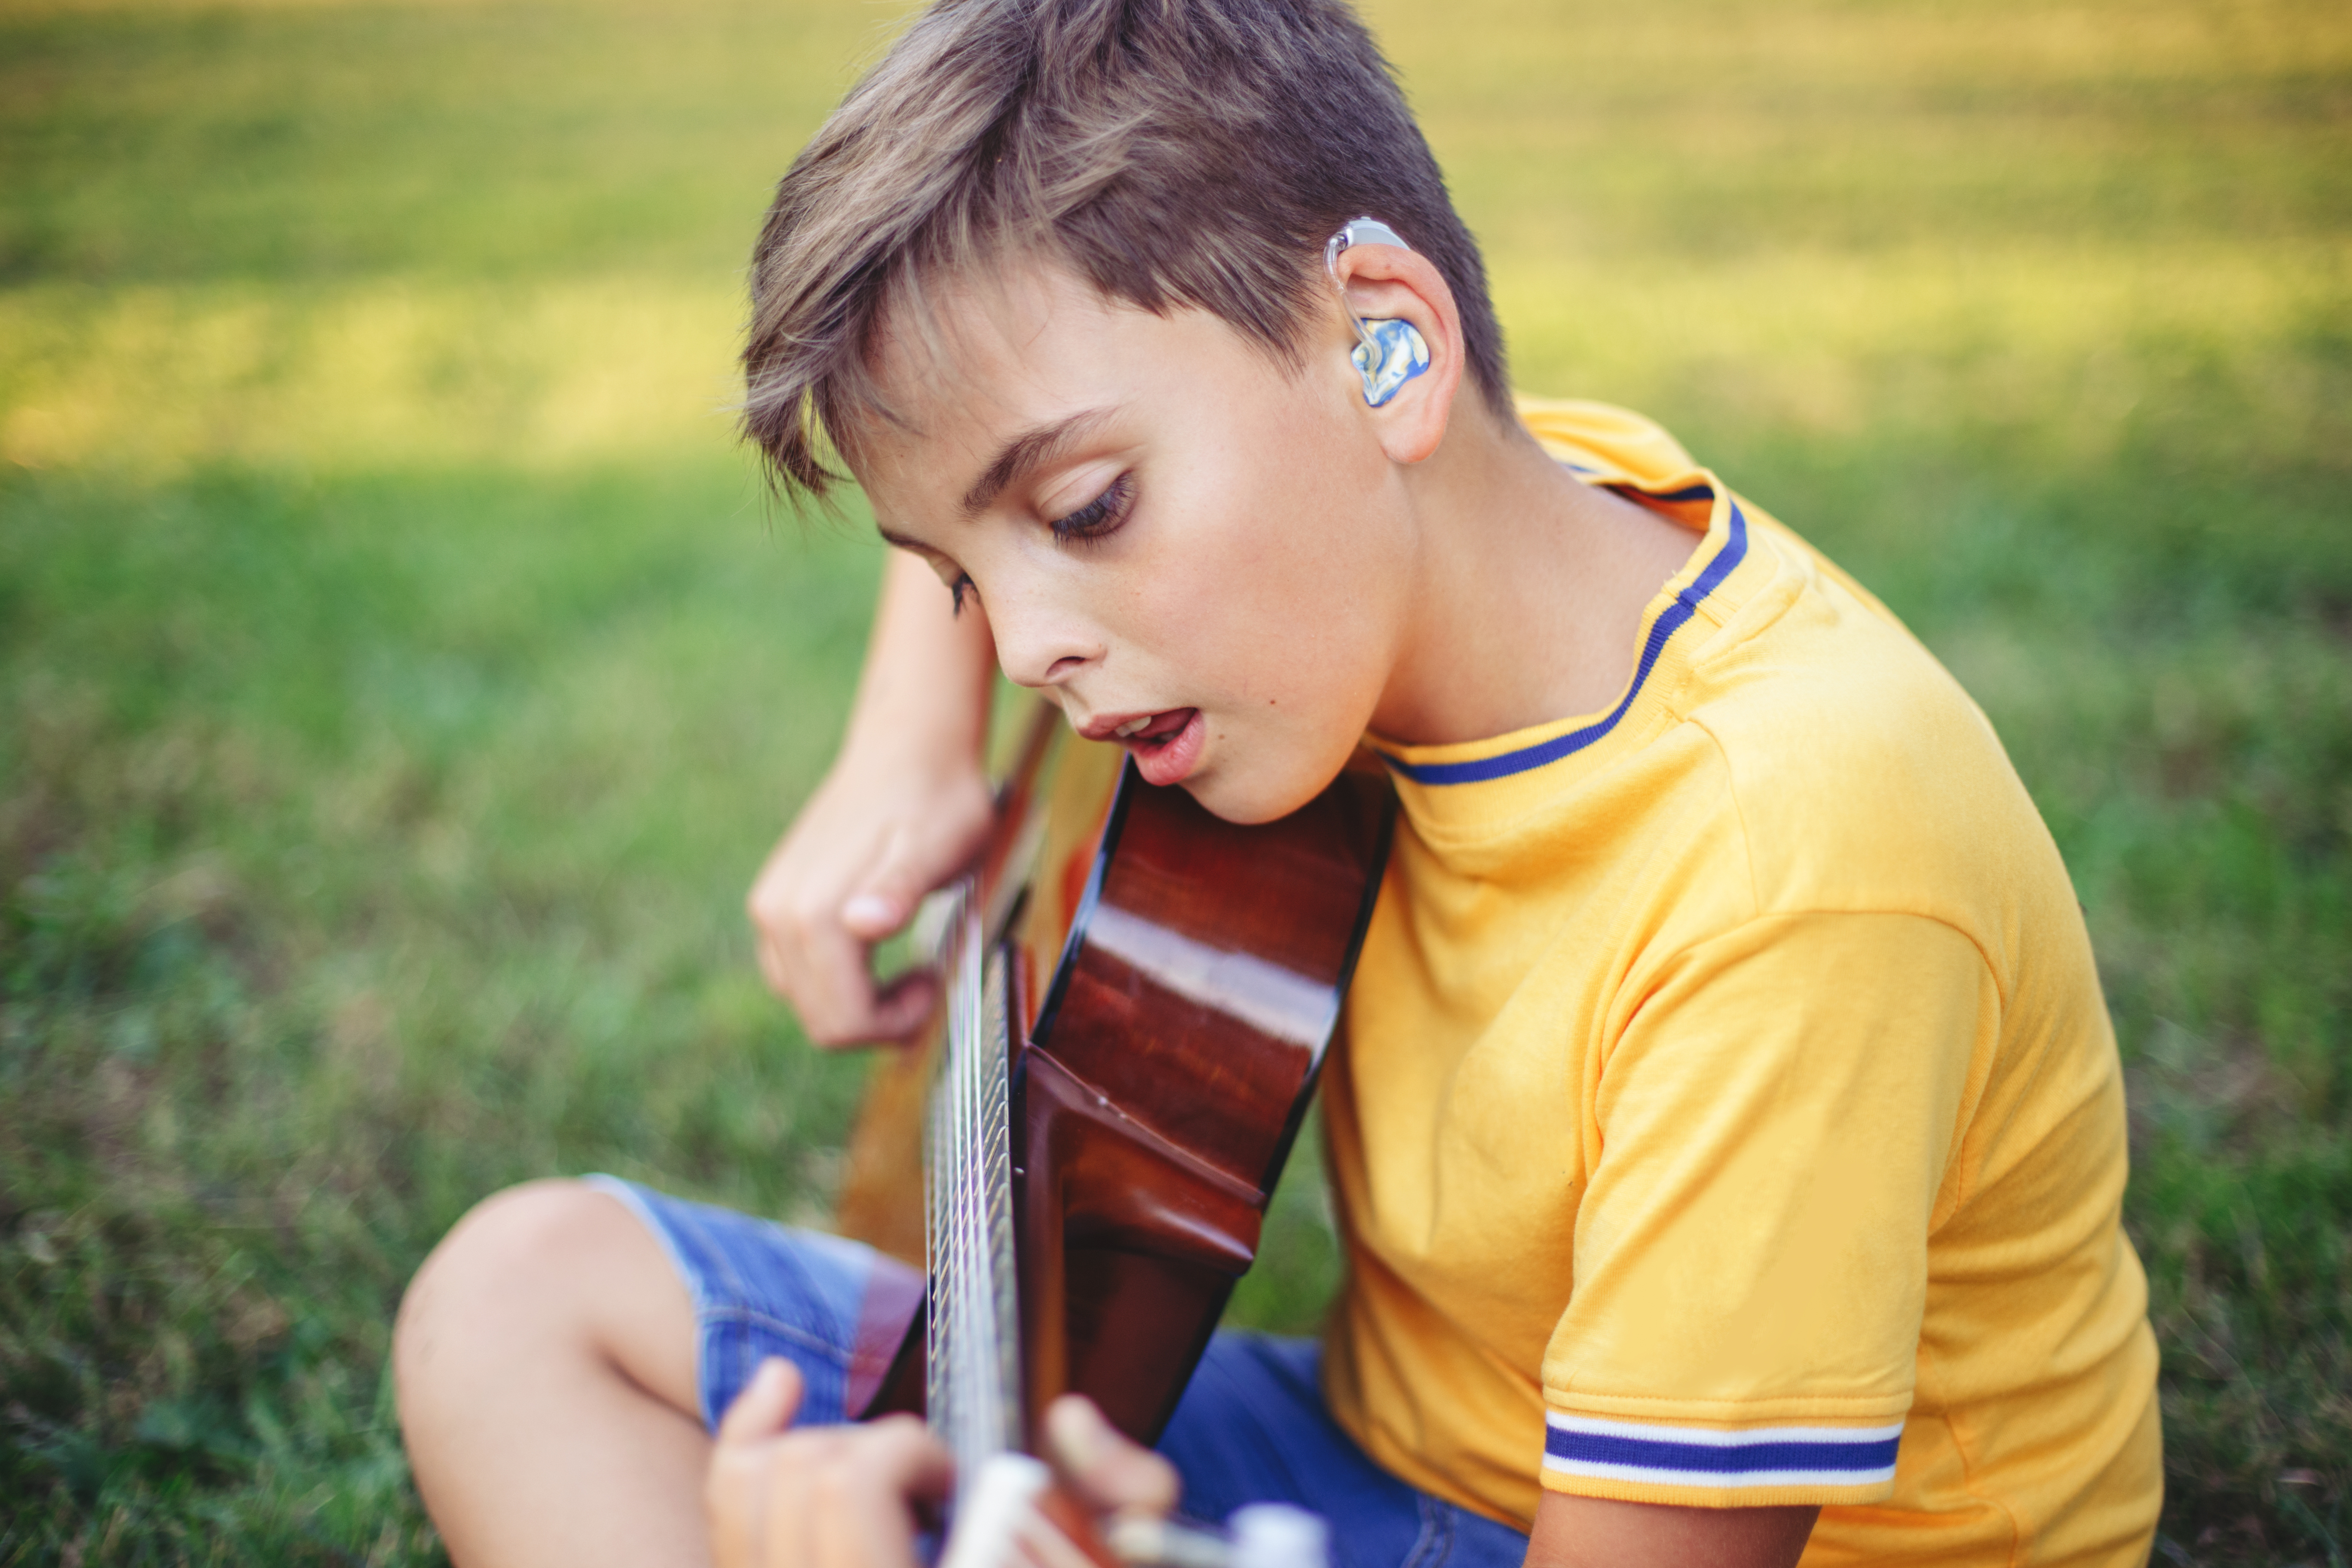 Student with hearing aid playing the guitar while sitting in the grass